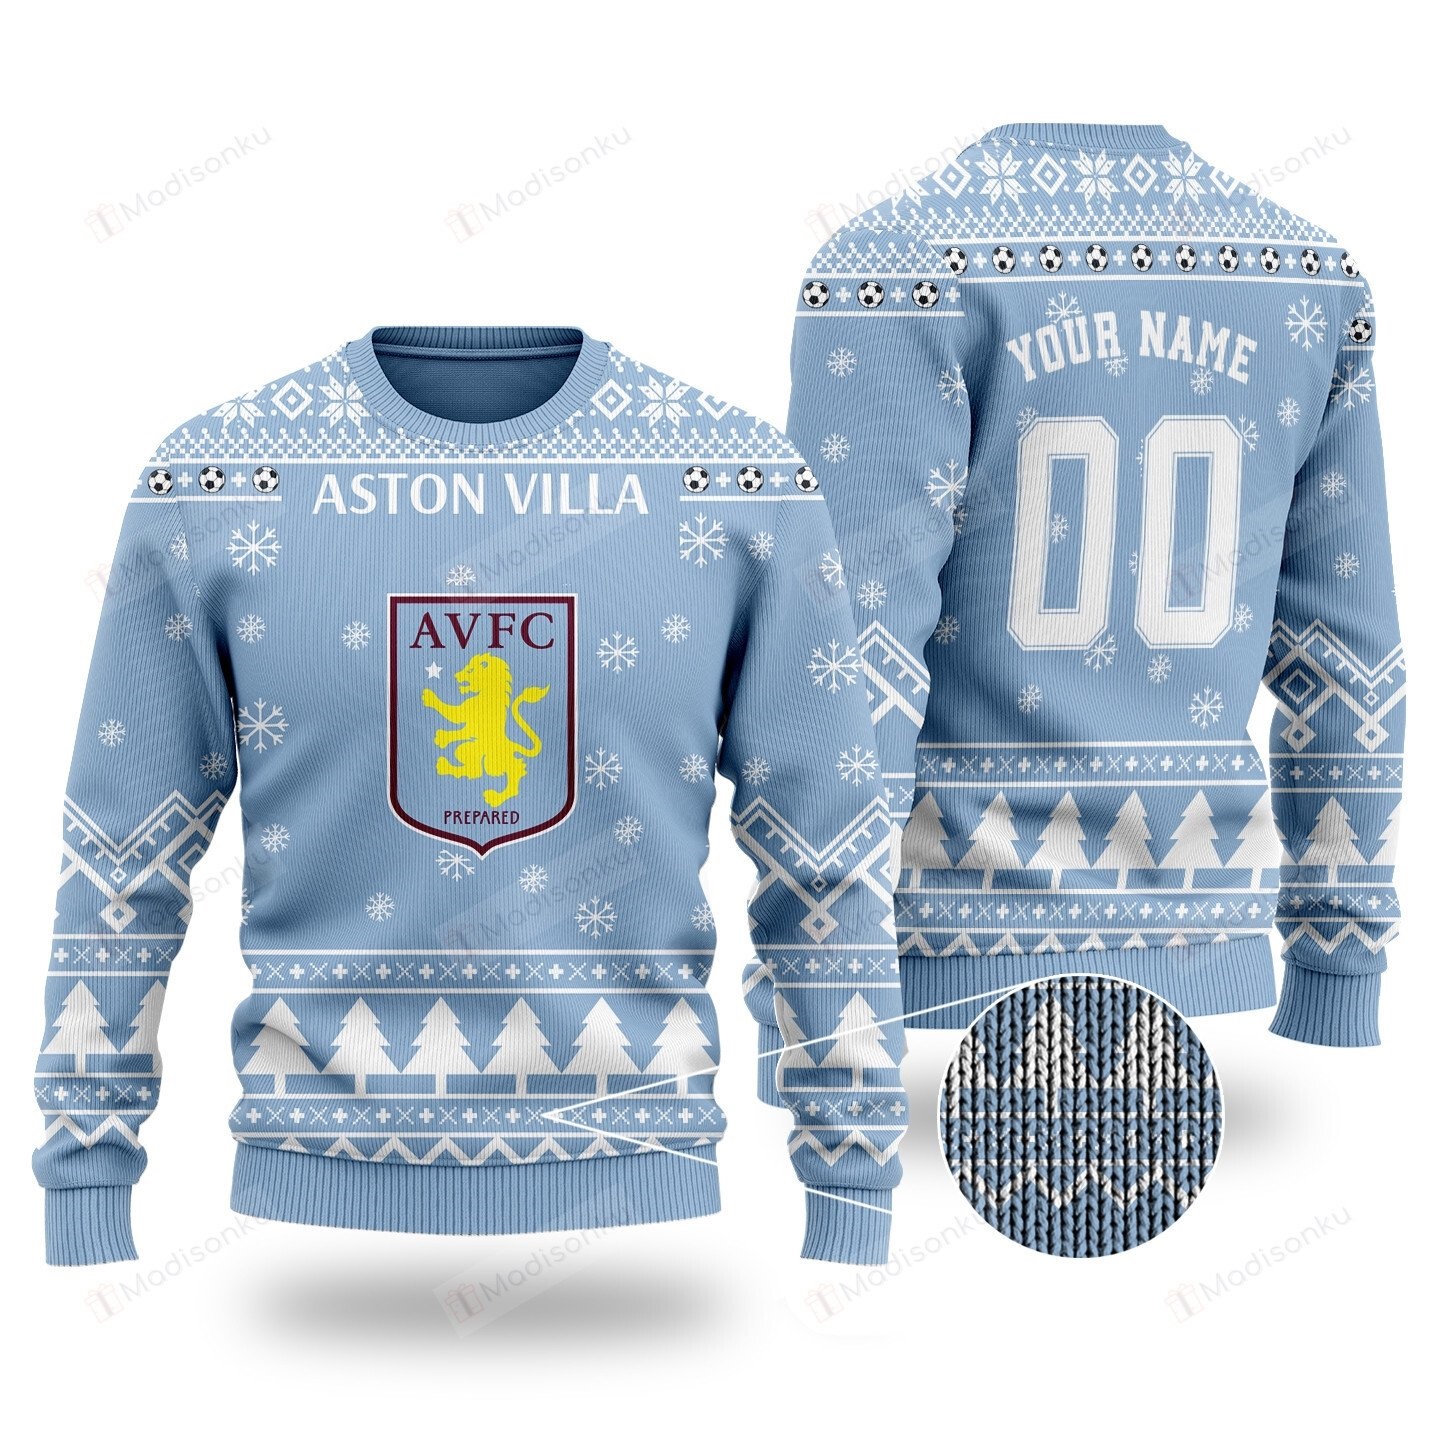 Aston Villa FC cutom name and number sweater